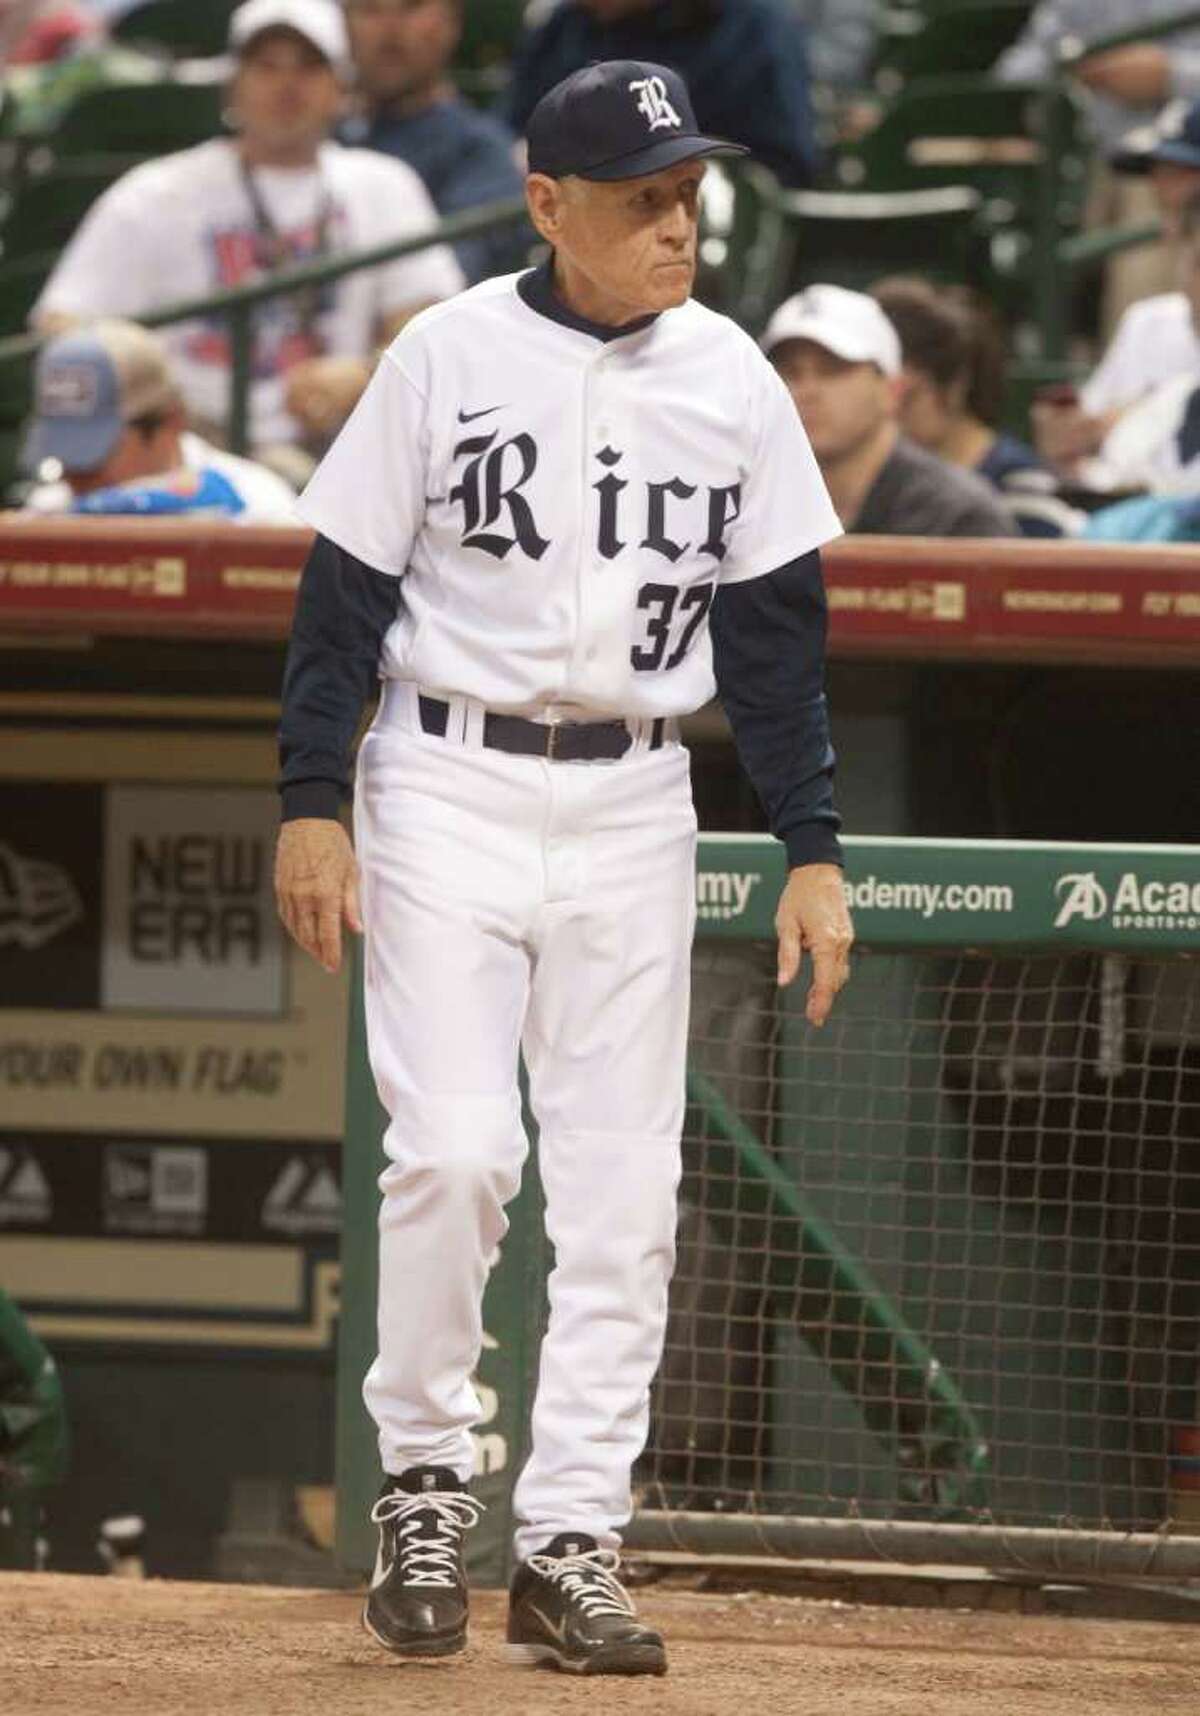 Rice manager Wayne Graham walks onto the field before his team faces off against the University of Texas during the Houston College Classic at Minute Maid Park on Friday March 2, 2012 in Houston, TX. Graham was inducted into the College Baseball Hall of Fame.